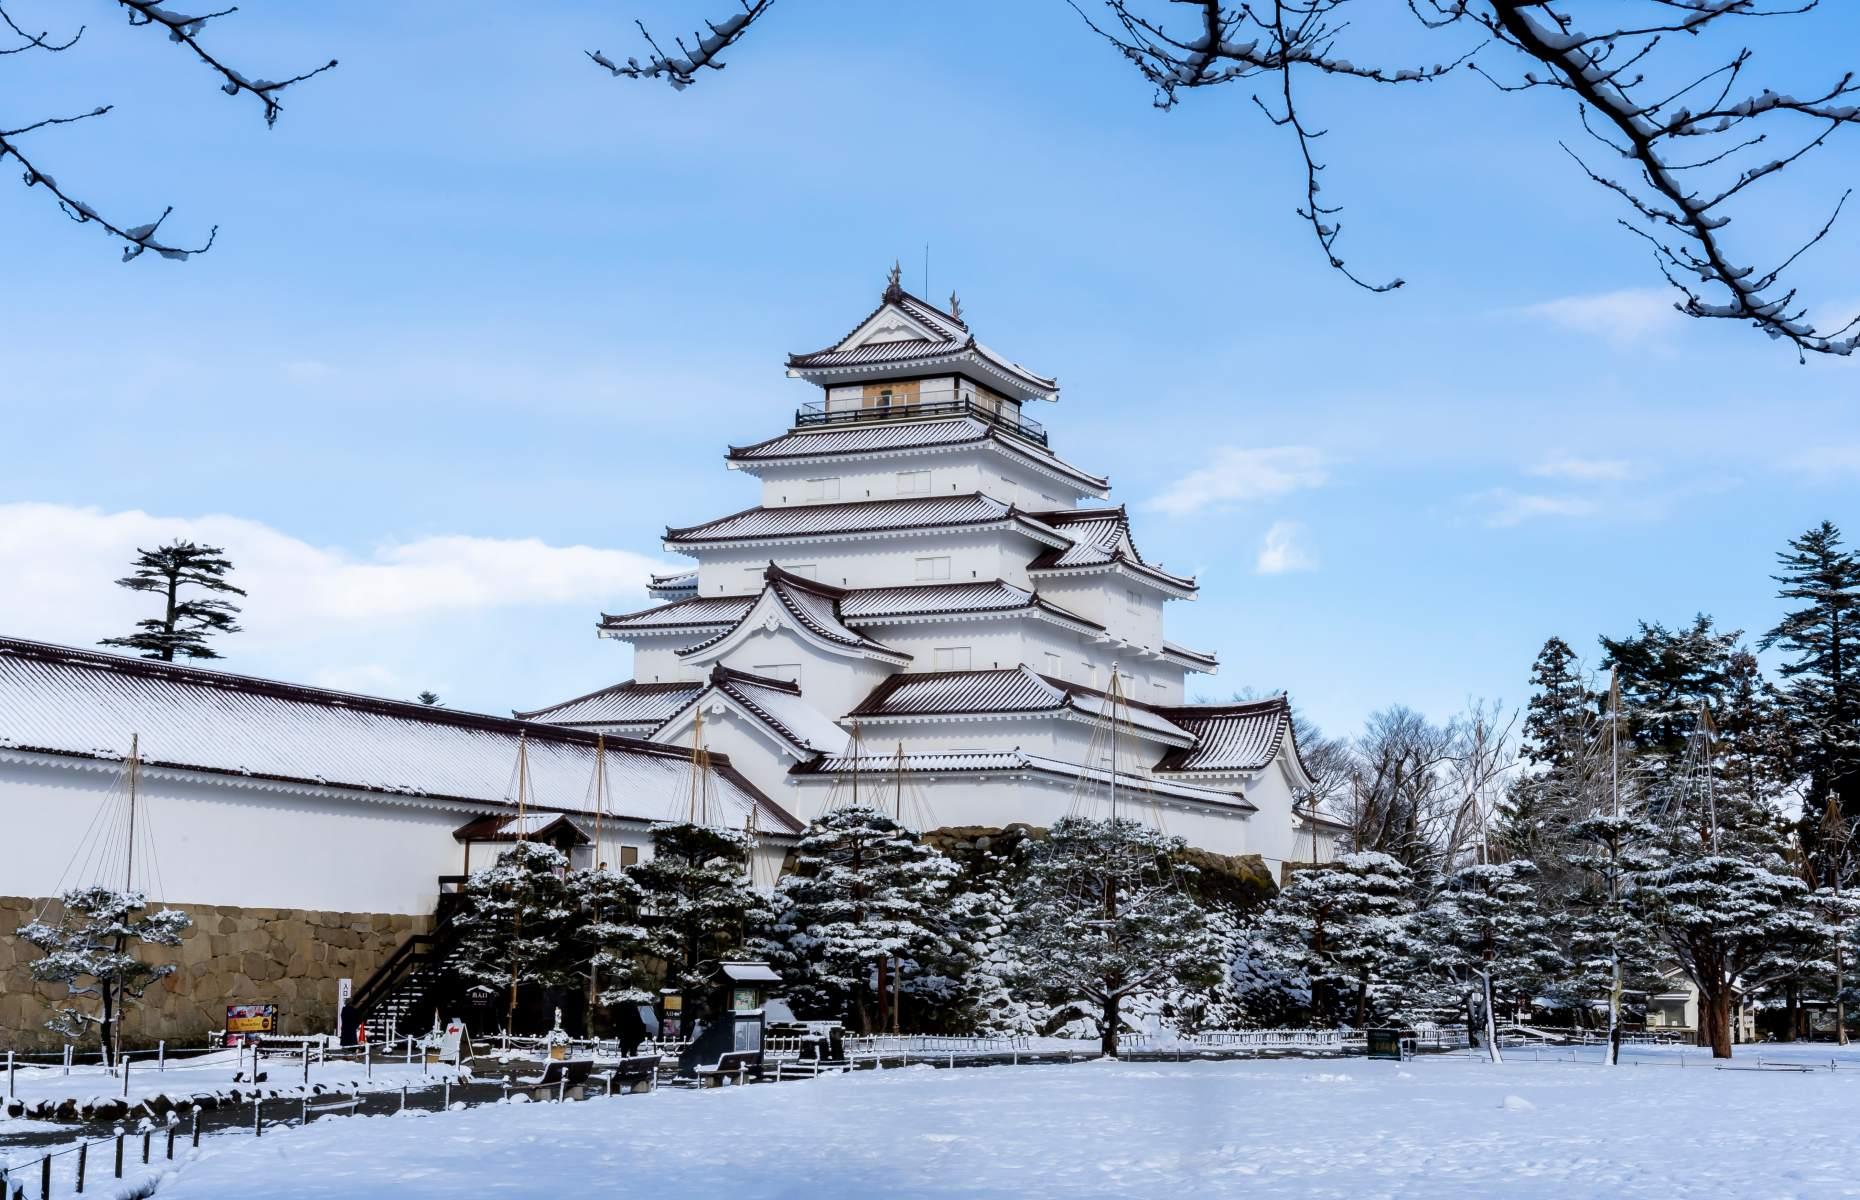 <p>From March 16, 2024, travelers will be able to explore more of Japan’s Hokuriku region via one of the country's world-renowned Shinkansen trains. The Hokuriku branch currently runs between Tokyo and Kanazawa, capital of Ishikawa Prefecture, but is being extended this year from Kanazawa to Tsuruga station in Fukui Prefecture. Located along the northwest coast of Honshu, Japan's main island, the Hokuriku region offers delicious seafood, dramatic mountains, castle towns and culture-rich cities for those intrepid enough to veer off the typical tourist trail.</p>